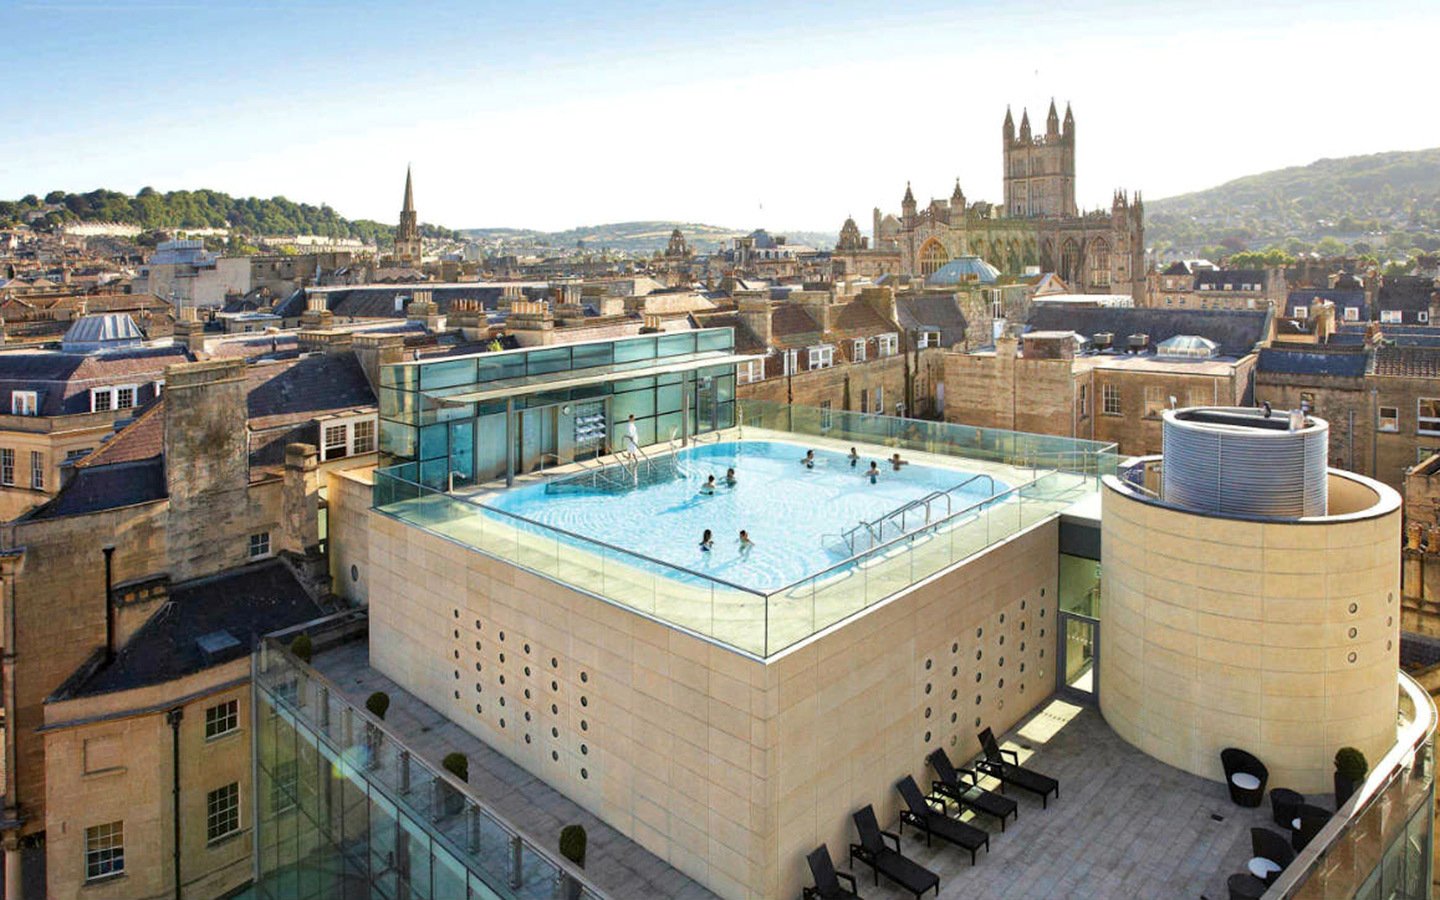 The rooftop pool at the Thermae Bath Spa